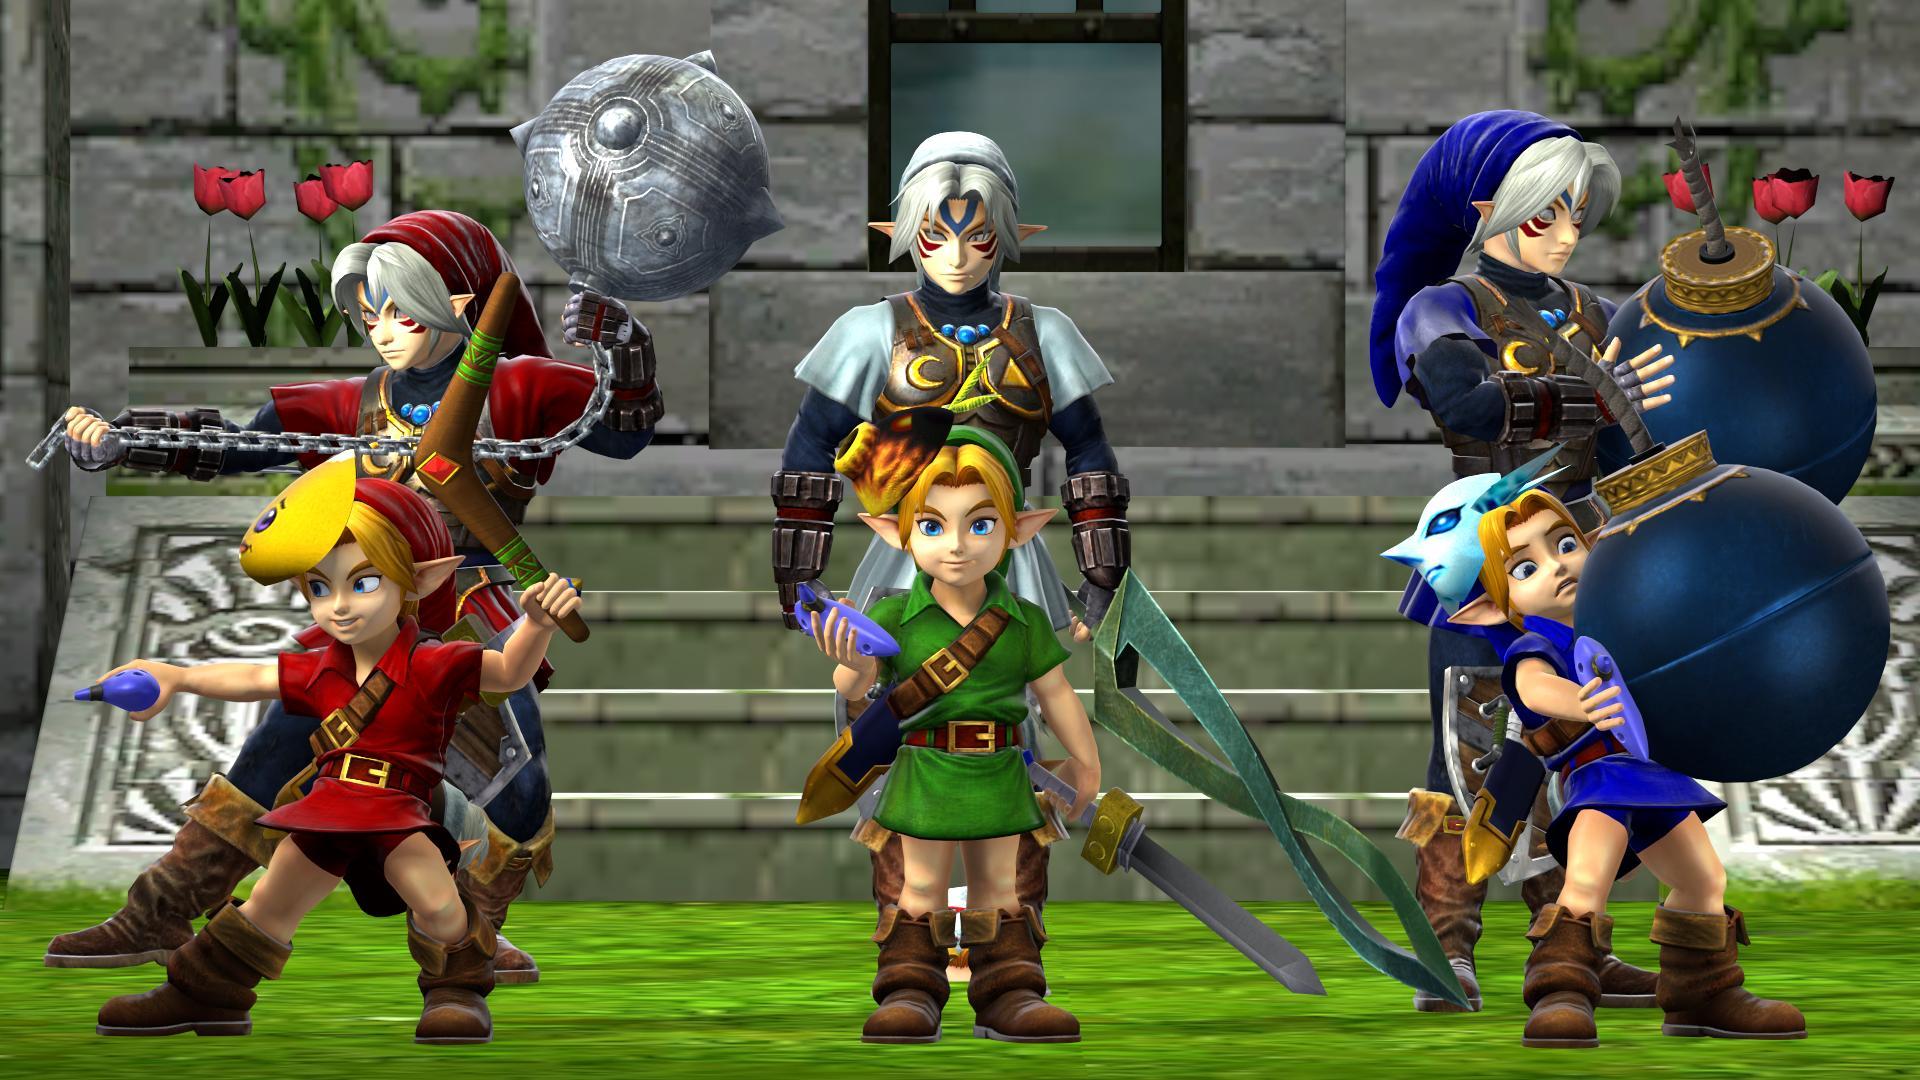 Dawn Of The 3D Remake: Young Link For DLC! ROY IS SEMI CLONED! HOPE